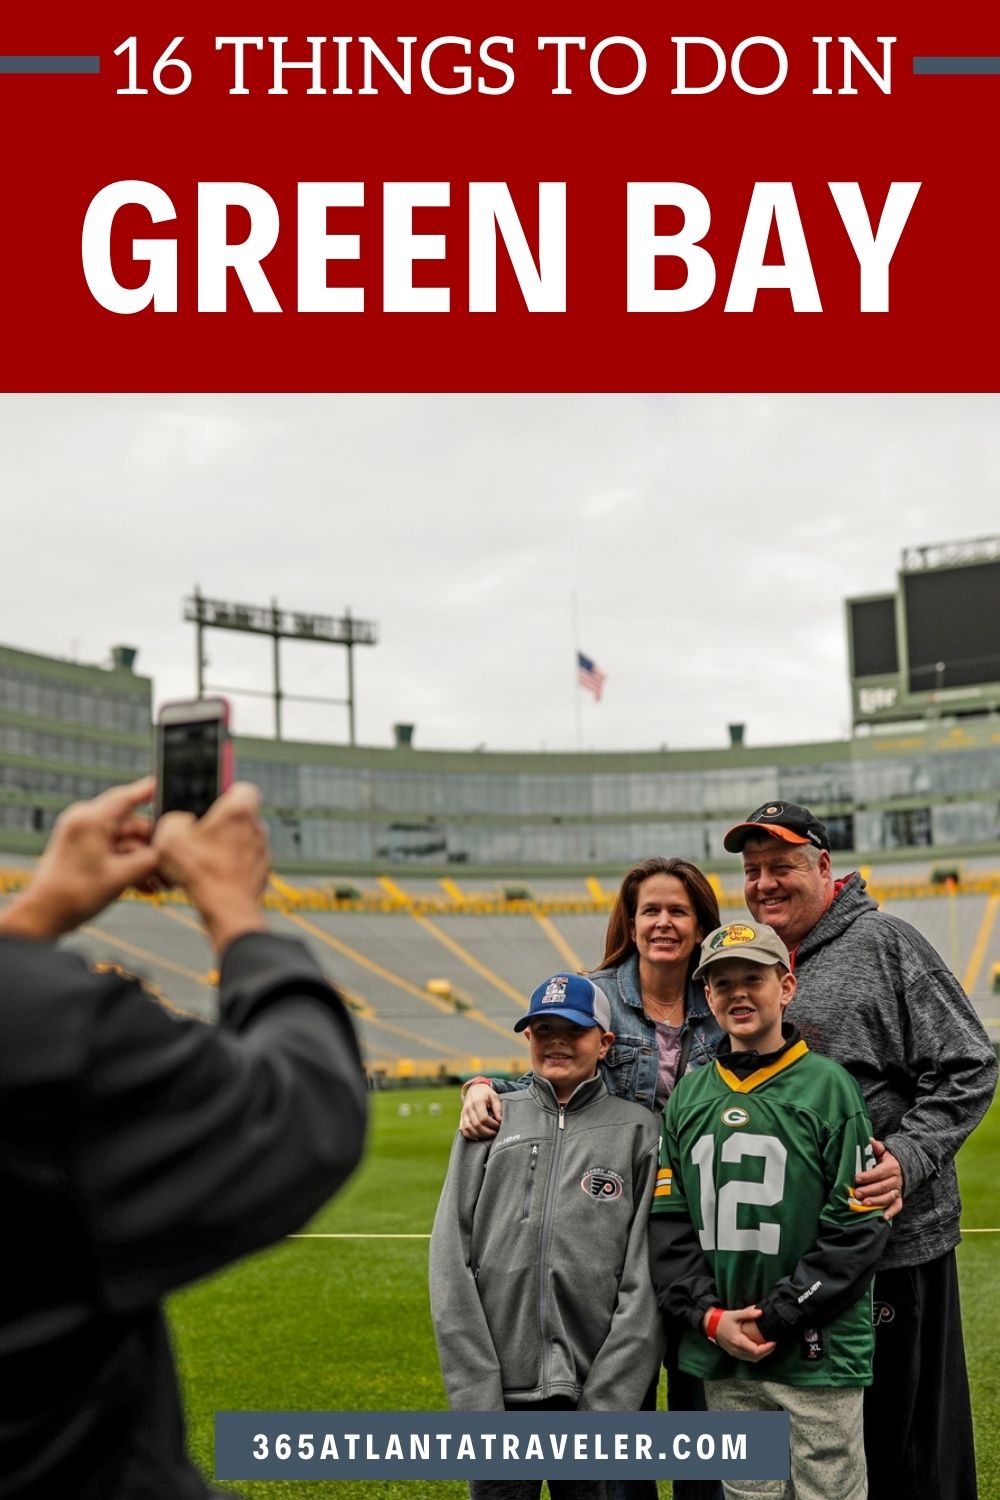 16 NOT-SO-CHEESY THINGS TO DO IN GREEN BAY, WI